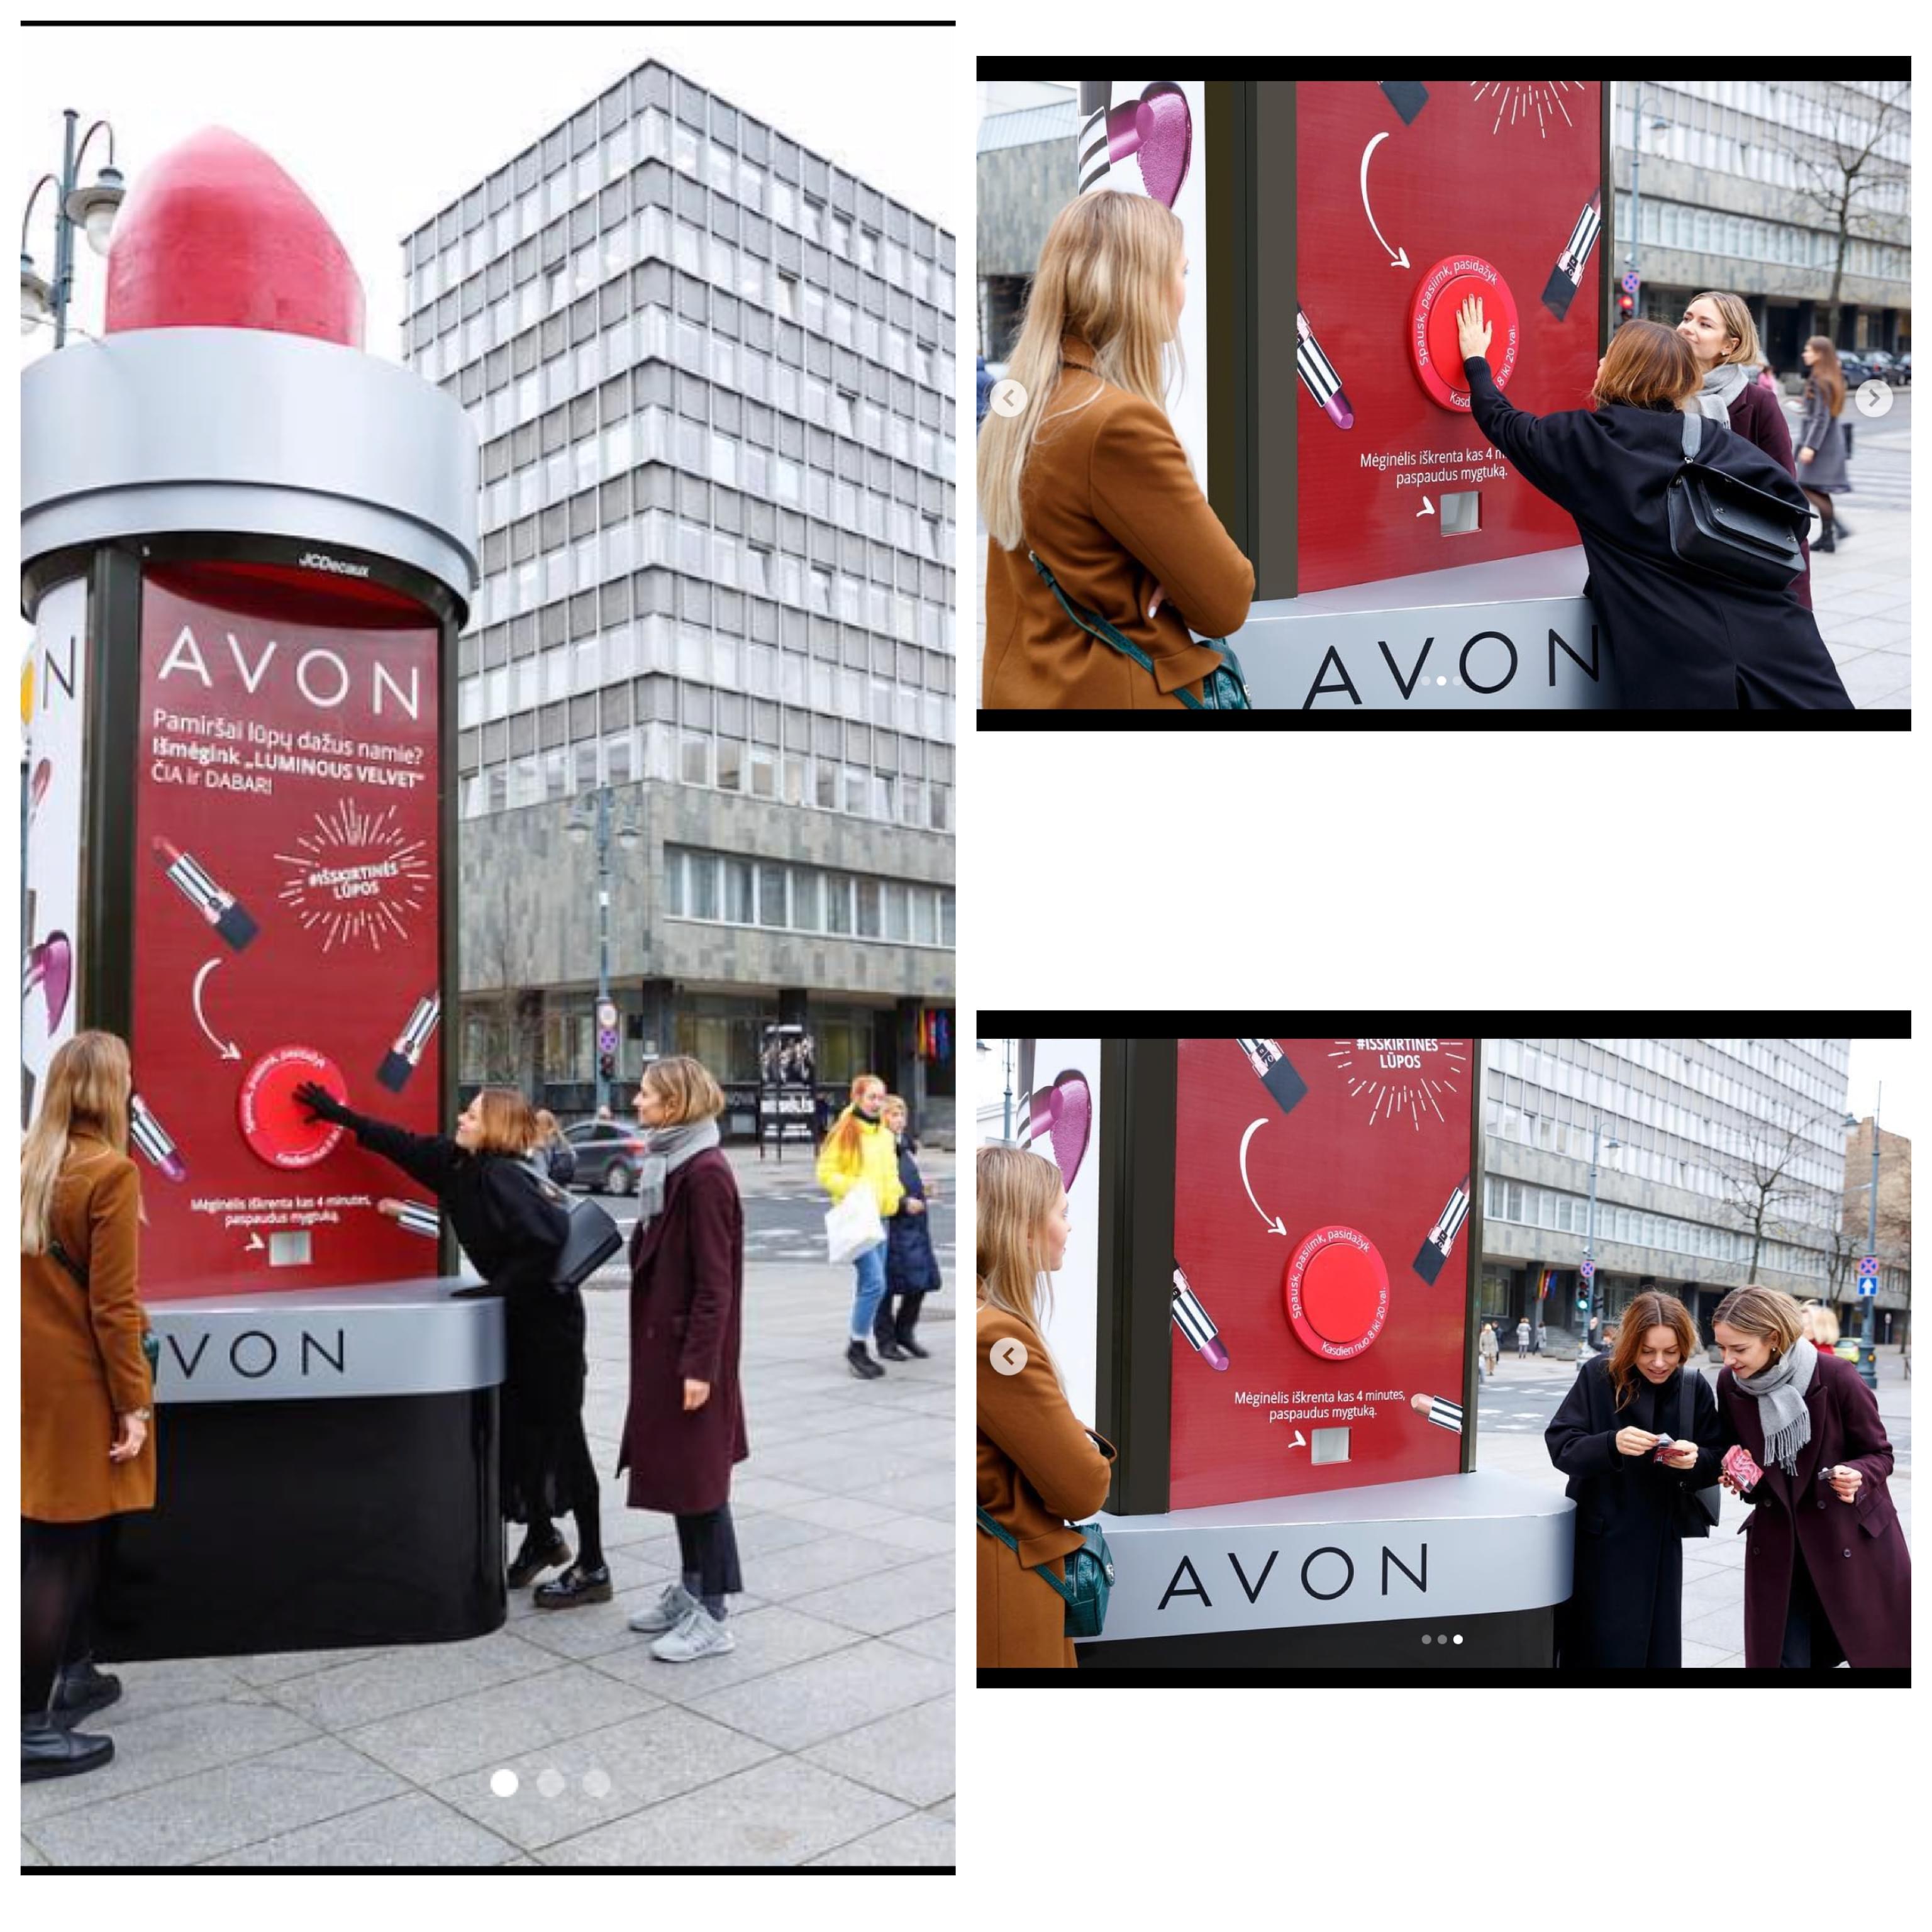 Avon's lipstick encourages interaction people on social wouldn't be able to experience